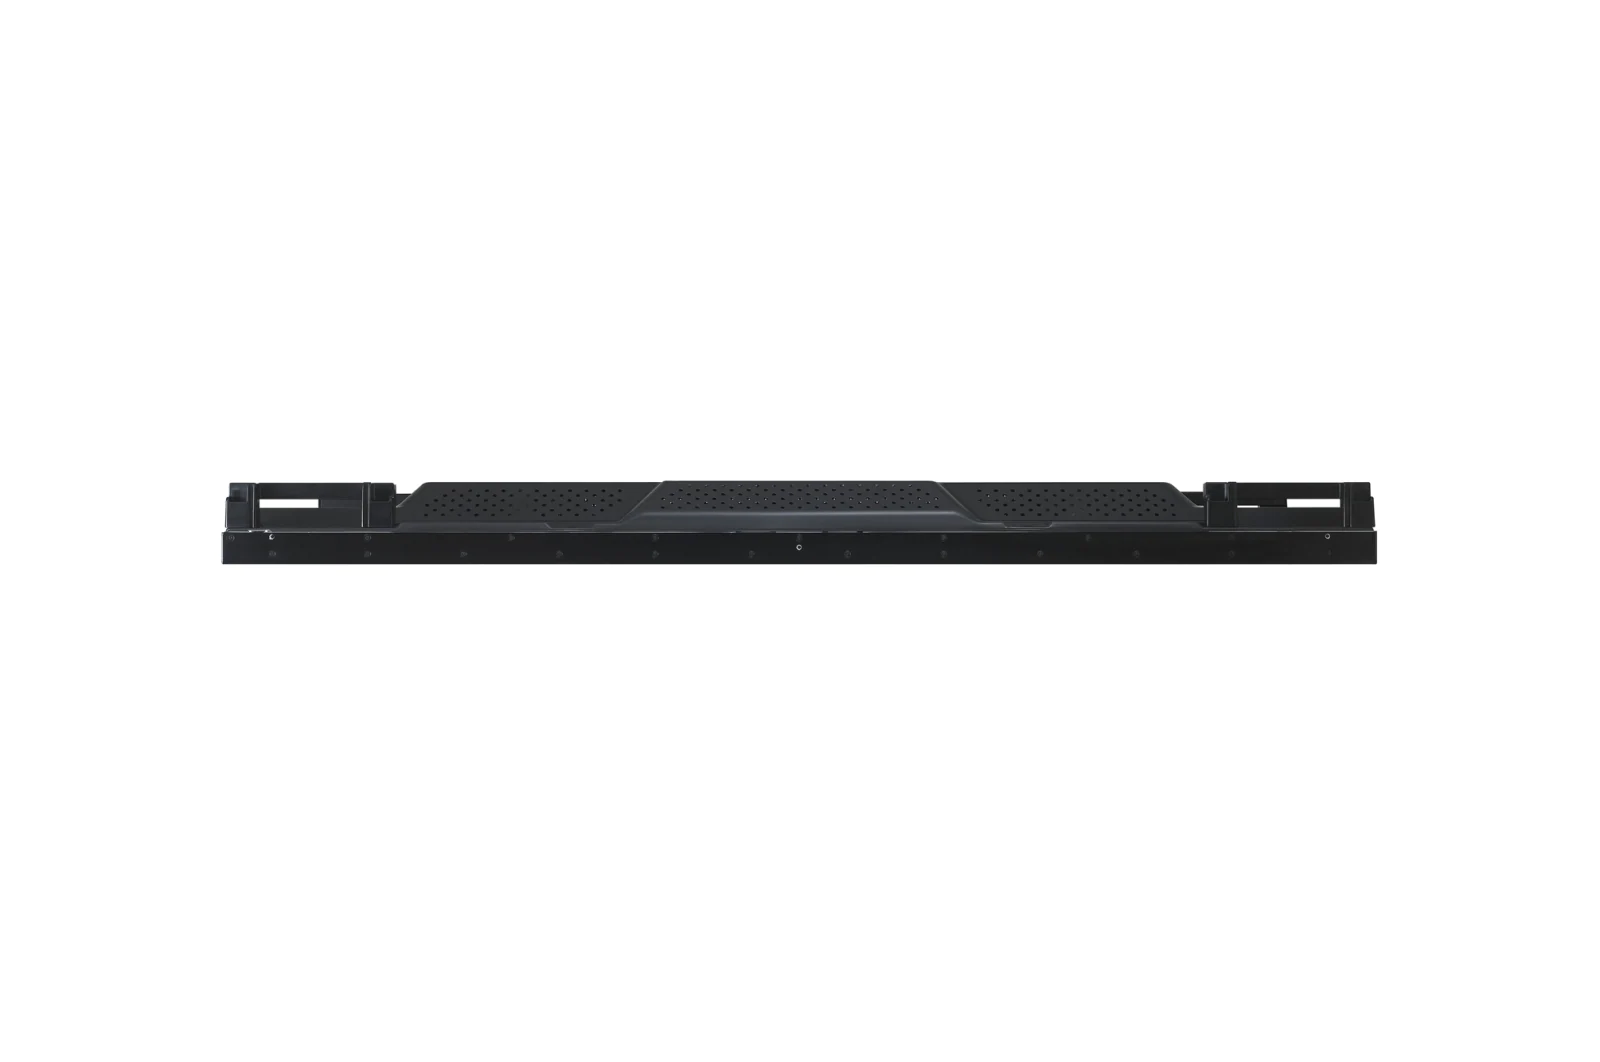 Picture showing the side view of a black device